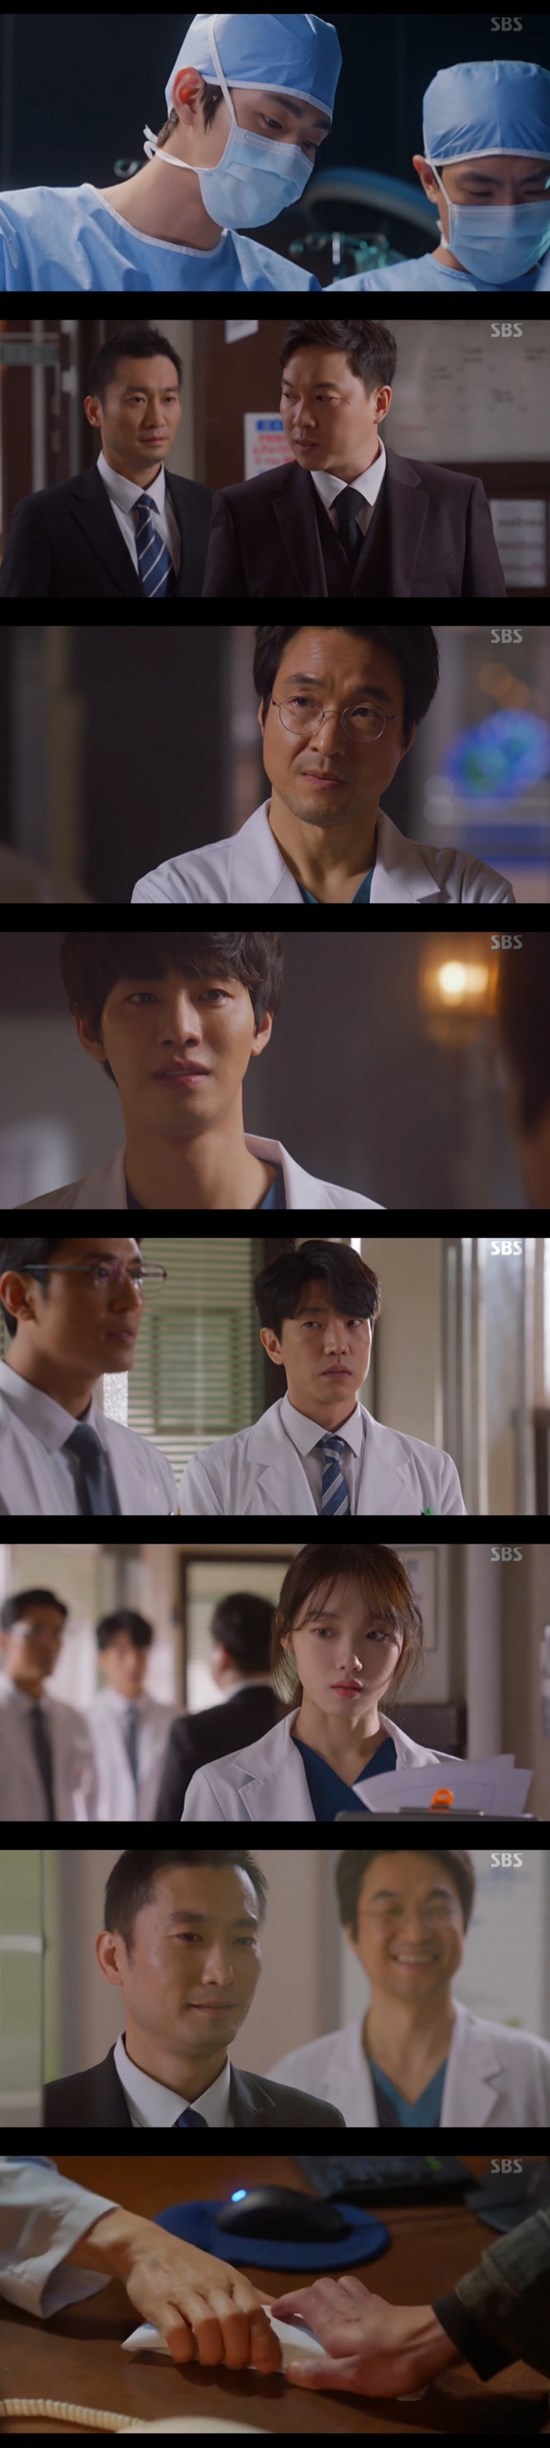 Seoul=) = Romantic Doctor Kim Sabu 2 Han Suk-kyu lent 10 million won to Ahn Hyo-seop to save.In SBS Mondays drama Romantic Doctor Kim Sabu 2 (playplayplay by Kang Eun-kyung/directed by Yoo In-sik), which was broadcast on the afternoon of the 14th, Kim Sabu (Bu Yong-ju, Han Suk-kyu) and Park Min-guk (played by Kim Joo-heon) were drawn.Park Min-guk was the Defense Minister and Kim Sa-bu was the ministers secretary for performing.Danger came to the Defense Minister surgery by mistake of Yang Ho-joon (Ko Sang-ho).Seo Woo Jin (Ahn Hyo-seop minutes) managed to hand over Danger, but due to Yang Ho-joons mistake, Park Min-guk failed to finish the surgery suture of Defense Minister.On the other hand, the operation of the performance secretary ended successfully and relieved the chief of staff.The second operation was recorded by the hospital, and Seo Woo Jin did not inform it, so he bought suspicions of the staff of the hospital.Seo Woo Jin was angry at the words of Jang Jang-tae (Im Won-hee), who said that he was besotted by money from the big hospital.Seo Woo Jin, who met Kim Sabu, cried, Did you test yourself?Yang Ho-joon tried to hide his mistake by removing the recording file of the second surgery, and Cha Eun-jae (Lee Sung-kyung) learned that.Yang Ho-joon conciliated Cha Eun-jae on condition of returning to the main office, and Cha Eun-jae was worried. At that time, Cha Eun-jae succeeded in stabilizing the patient who had been Danger in the emergency room, unlike the appearance in the operating room.Kim Sa-bu looked at this, and Cha Eun-jae explained that there was trauma only in the operating room. Cha Eun-jae was pleased with his performance.Park Min-guk said that there was no second surgery recording in the demand of Defense Ministers son, and the second surgery recording copy was revealed by the wit of Cha Eun-jae.The charter was reversed, and the son of Defense Minister apologized to Kim Sabu, who then handed Kim a copy of the second operation.Kim Sabu handed 10 million won to Seo Woo Jin and laughed, I pay 1 million won every month, and Seo Woo Jin continued to work at Doldam Hospital.On the other hand, SBS Romantic Doctor Kim Sabu 2 is a drama depicting the story of real doctor in the background of a poor stone wall hospital in the province. It is broadcast every Monday and Tuesday at 9:40 pm.